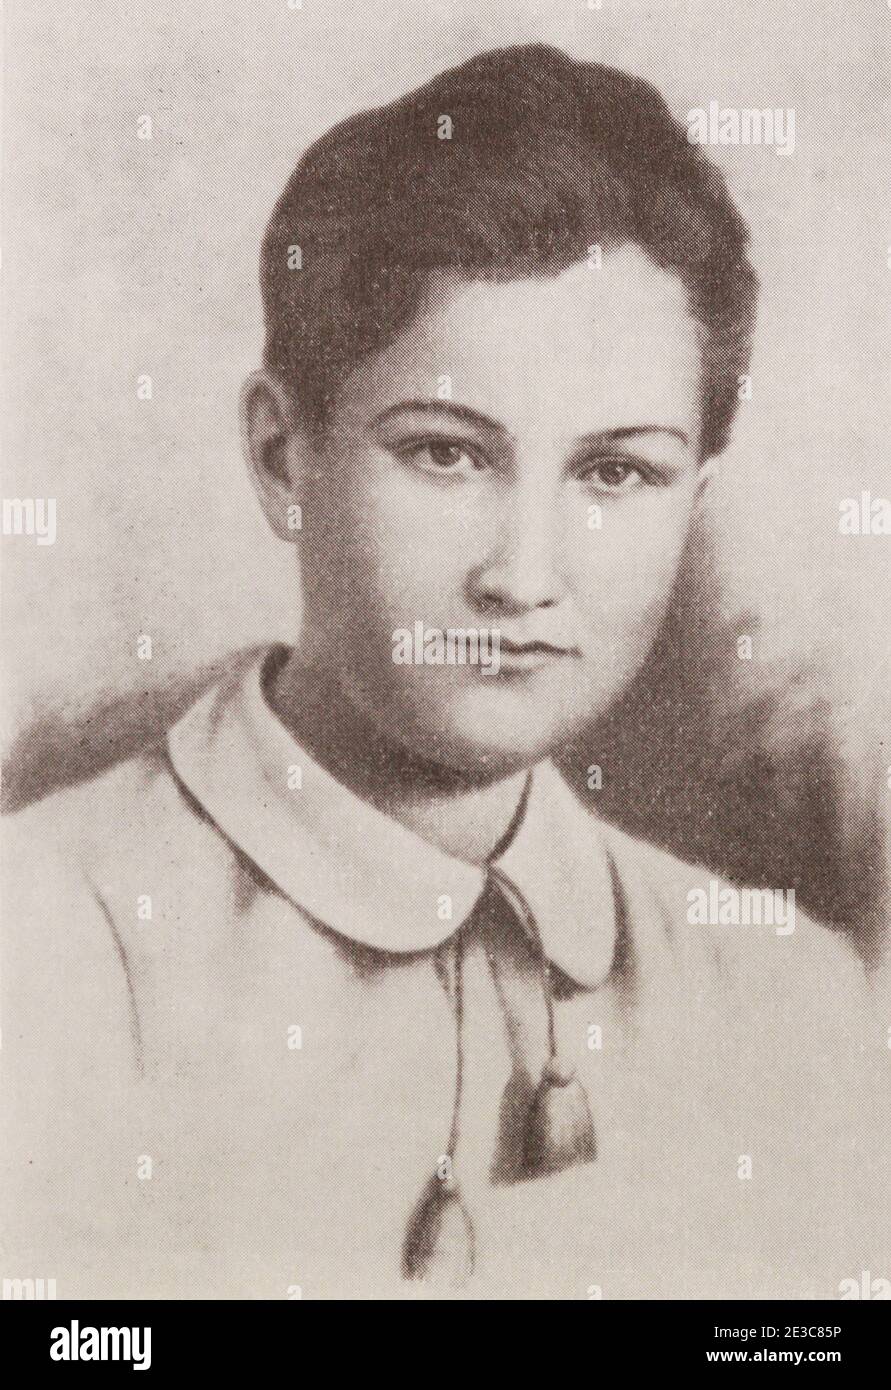 Portrait of Zoya Kosmodemyanskaya. Zoya Anatolyevna Kosmodemyanskaya (September 13, 1923 – November 29, 1941) was a Soviet partisan. She was executed after acts of sabotage against the invading armies of Nazi Germany; after stories emerged of her defiance towards her captors, she was posthumously declared a Hero of the Soviet Union. She became one of the most revered heroines of the Soviet Union. Stock Photo